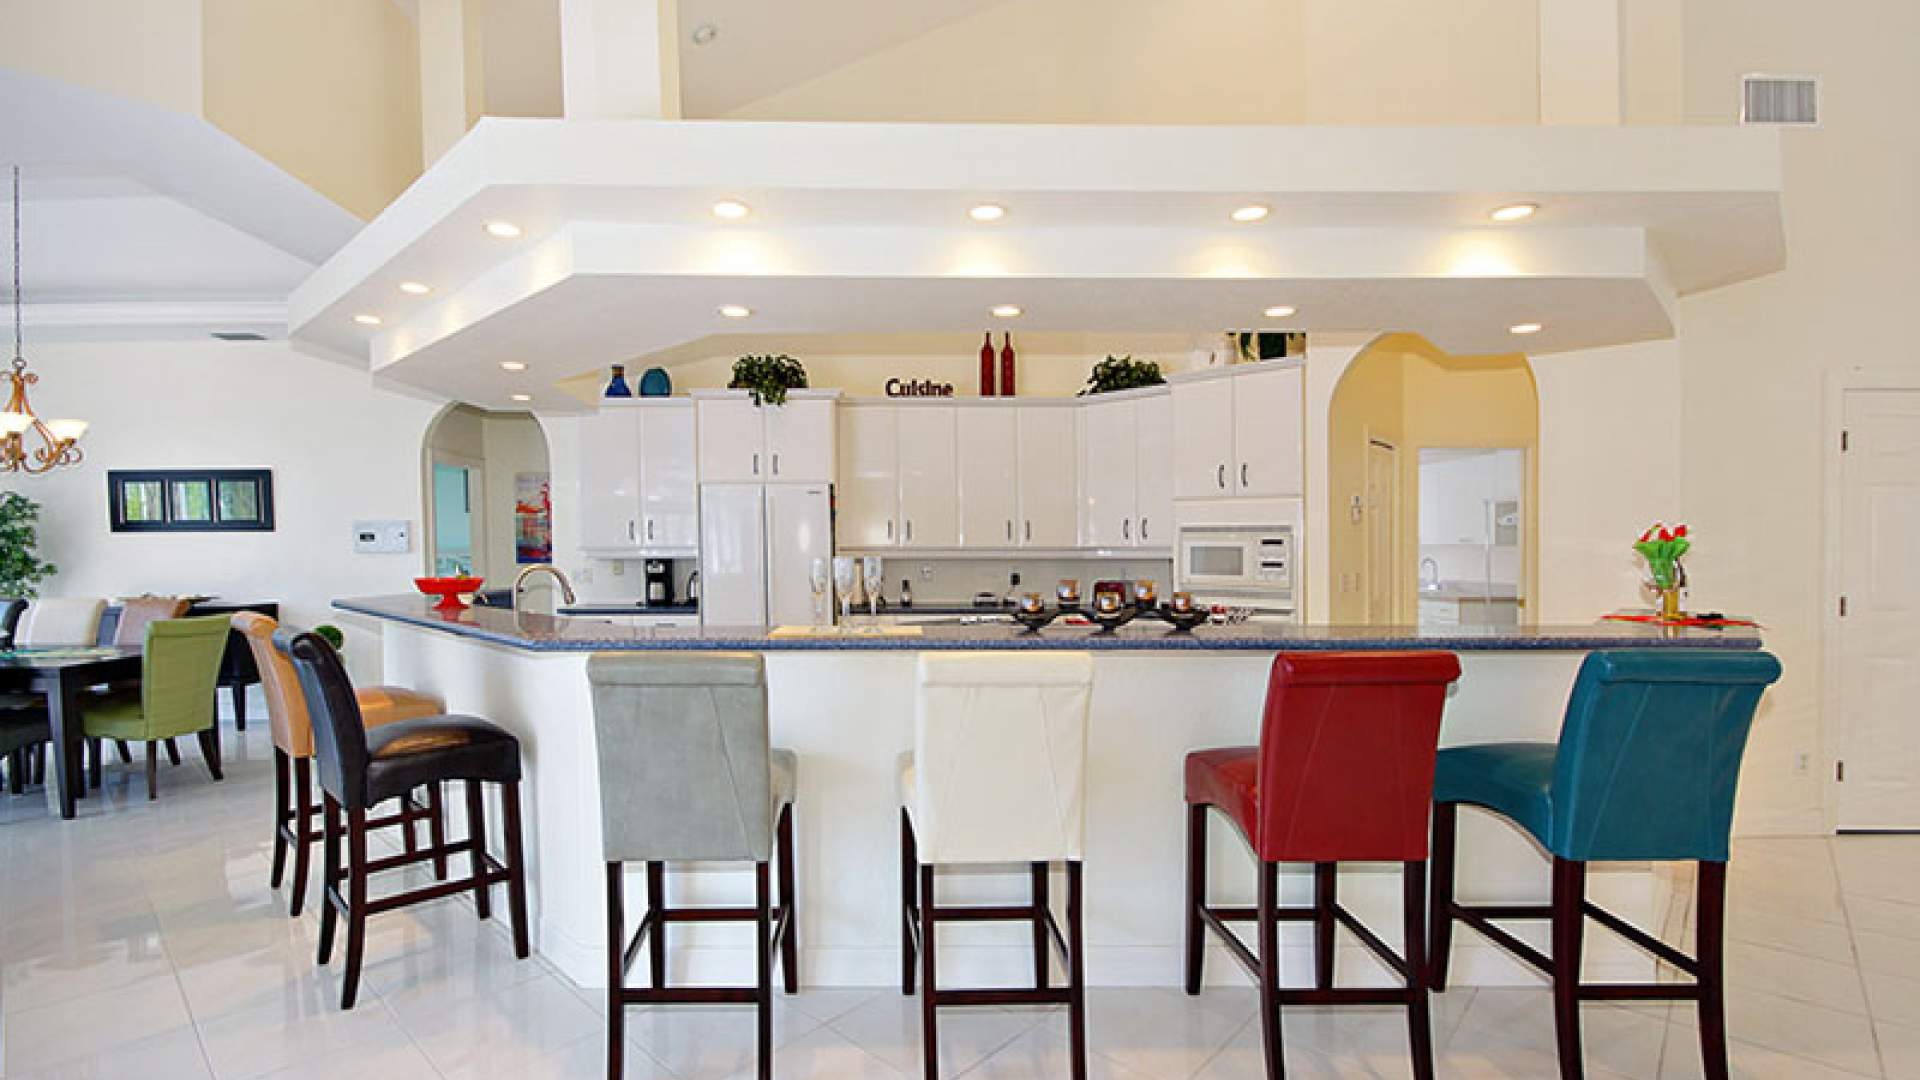 The spacious kitchen is fully equipped, of course